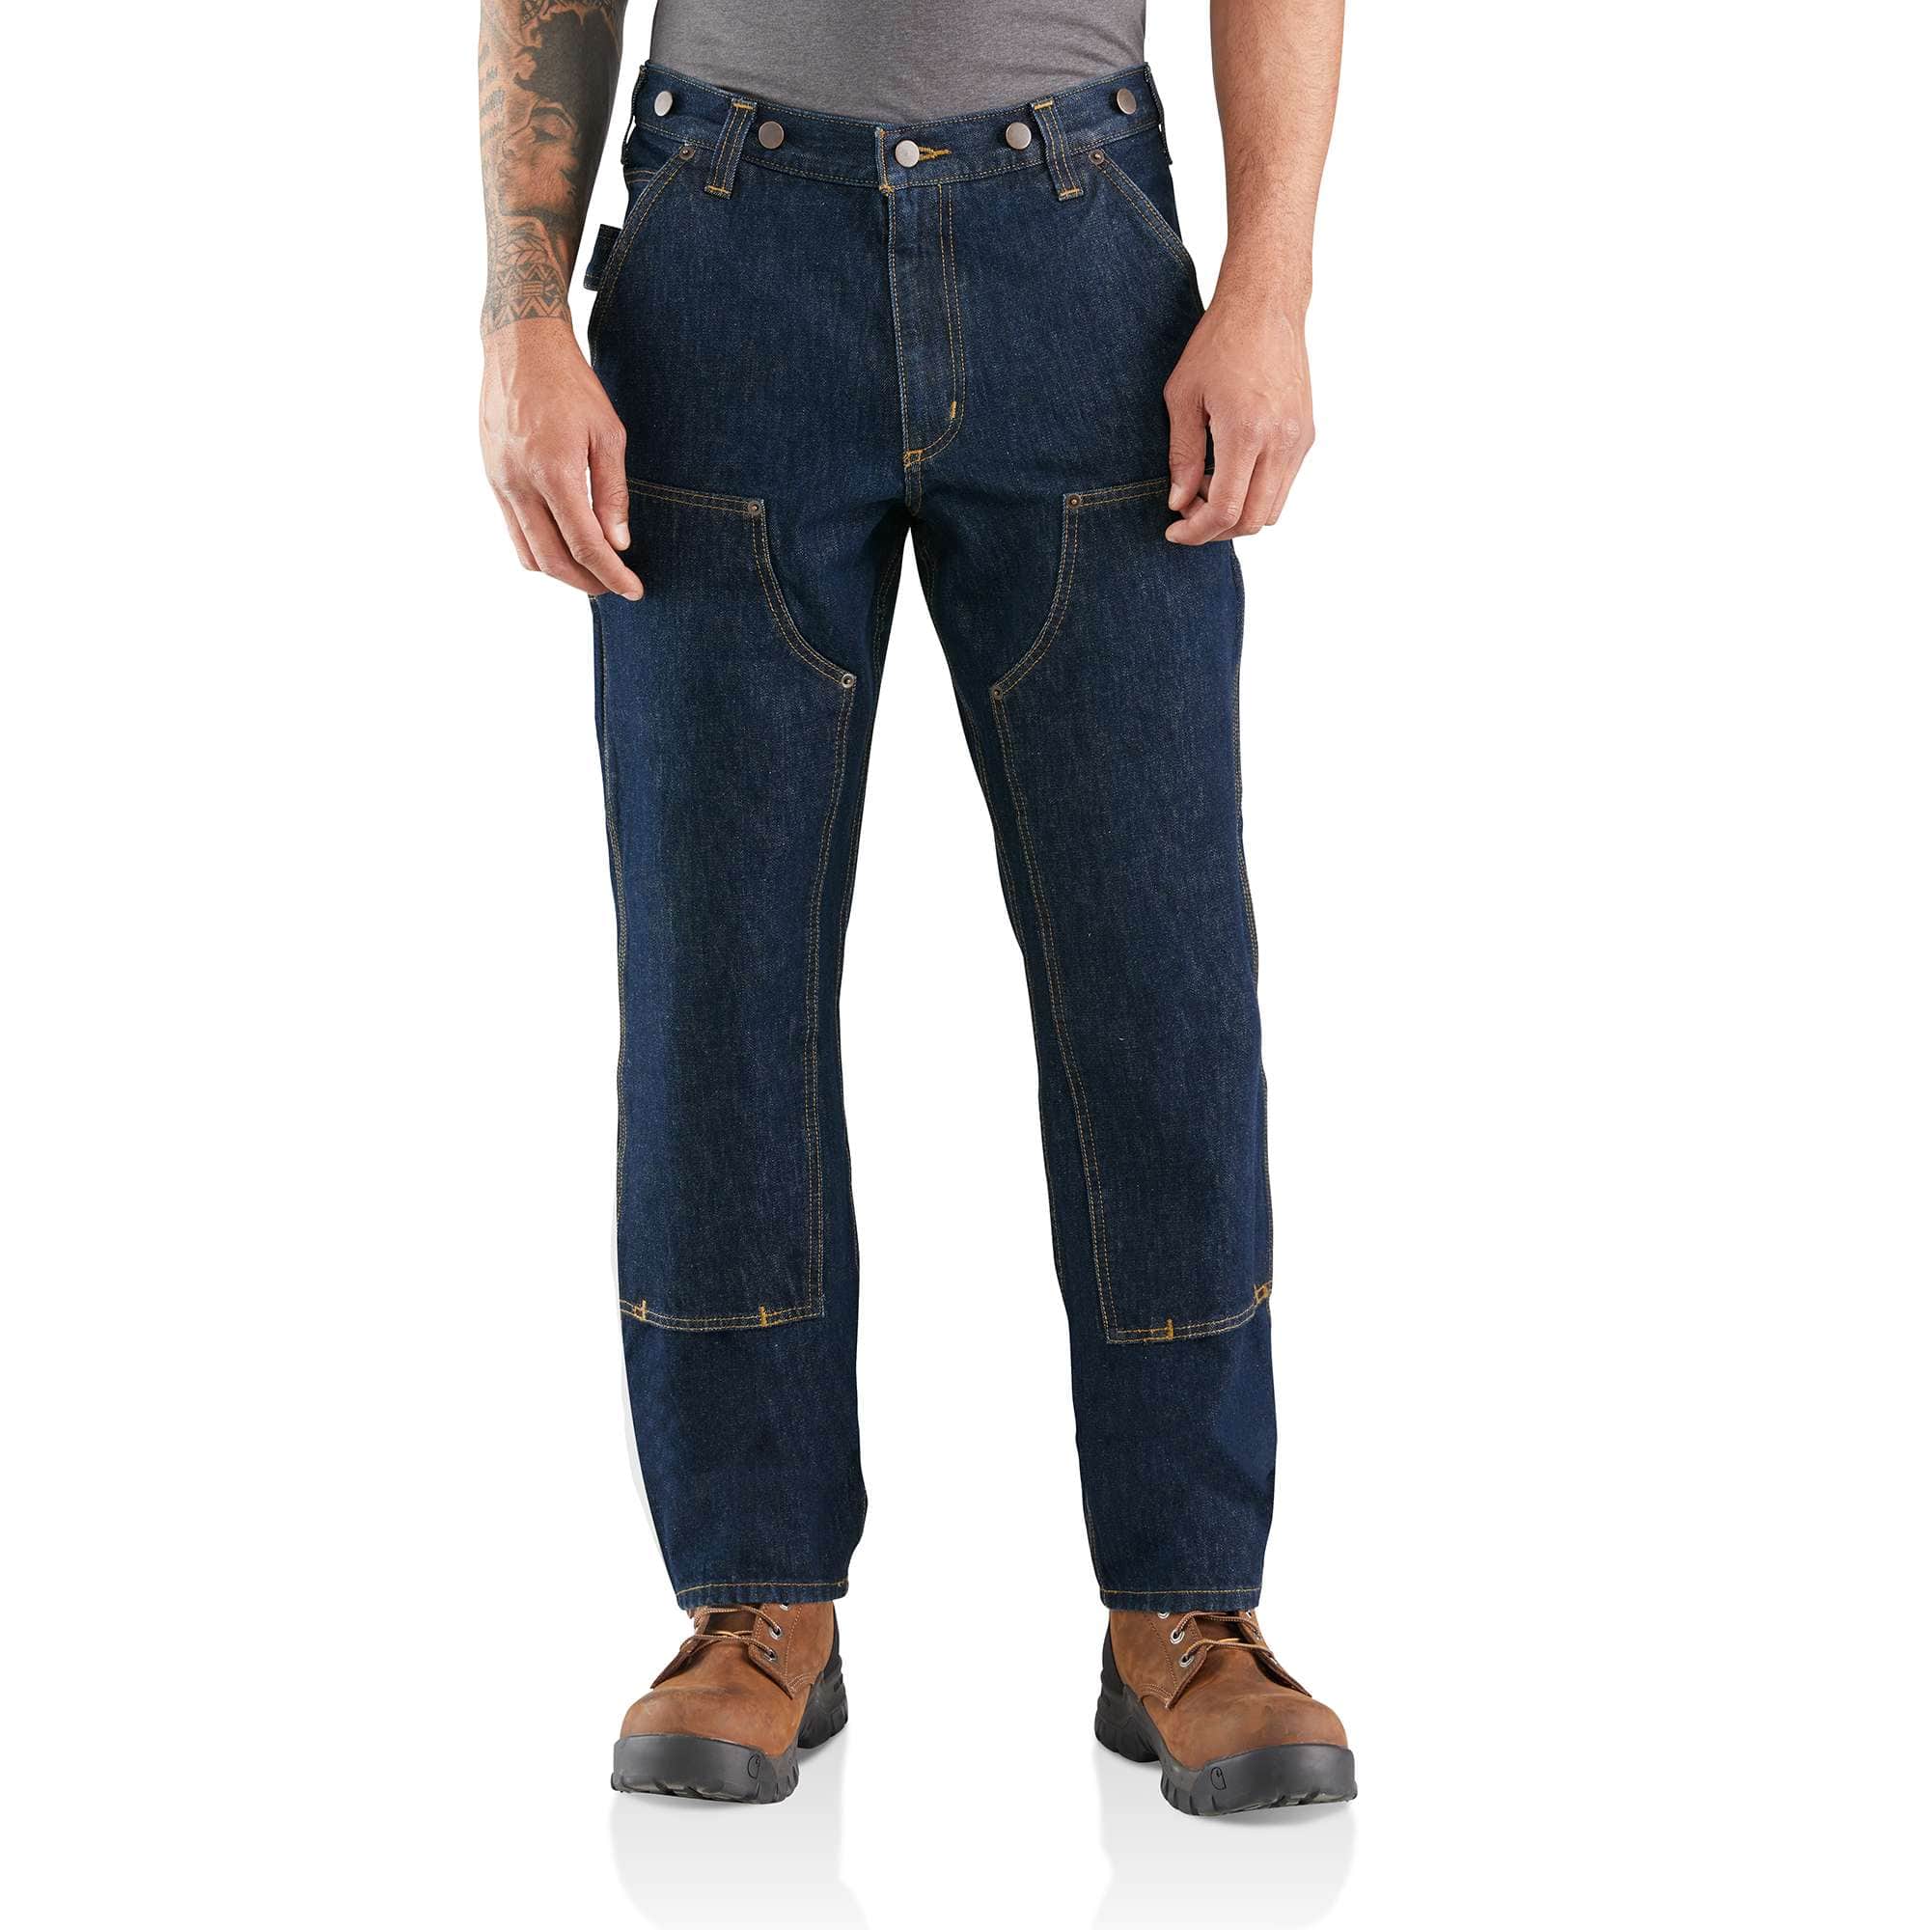 durable work jeans